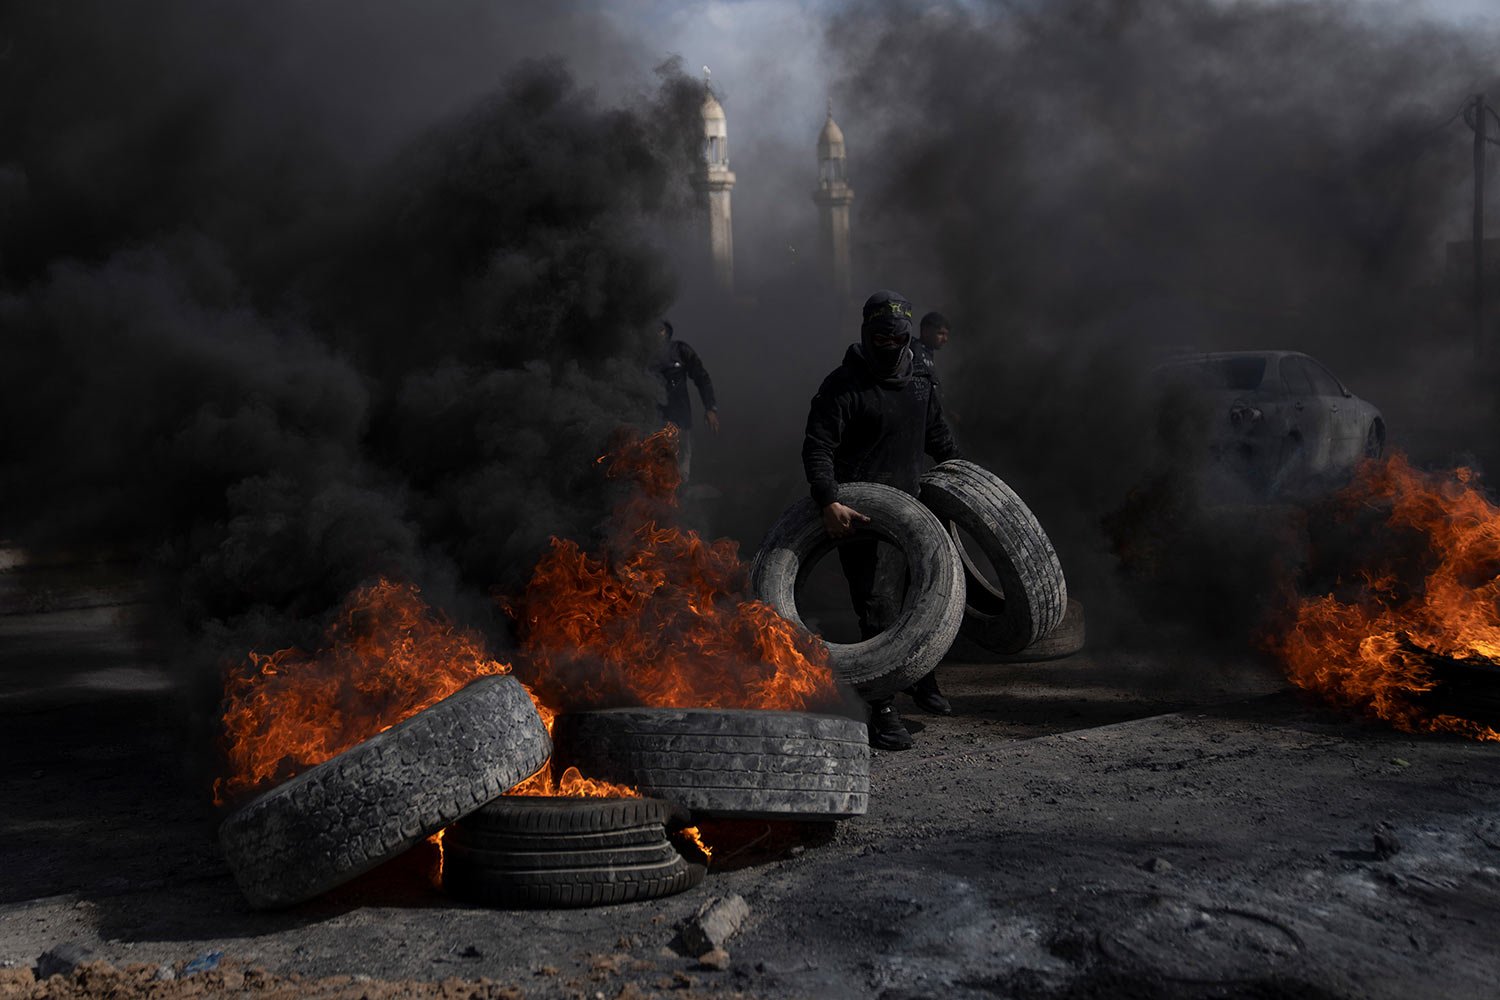  Palestinian protesters block the main road with burning tires in the West Bank city of Jericho, Monday, Feb. 6, 2023. (AP Photo/Nasser Nasser) 